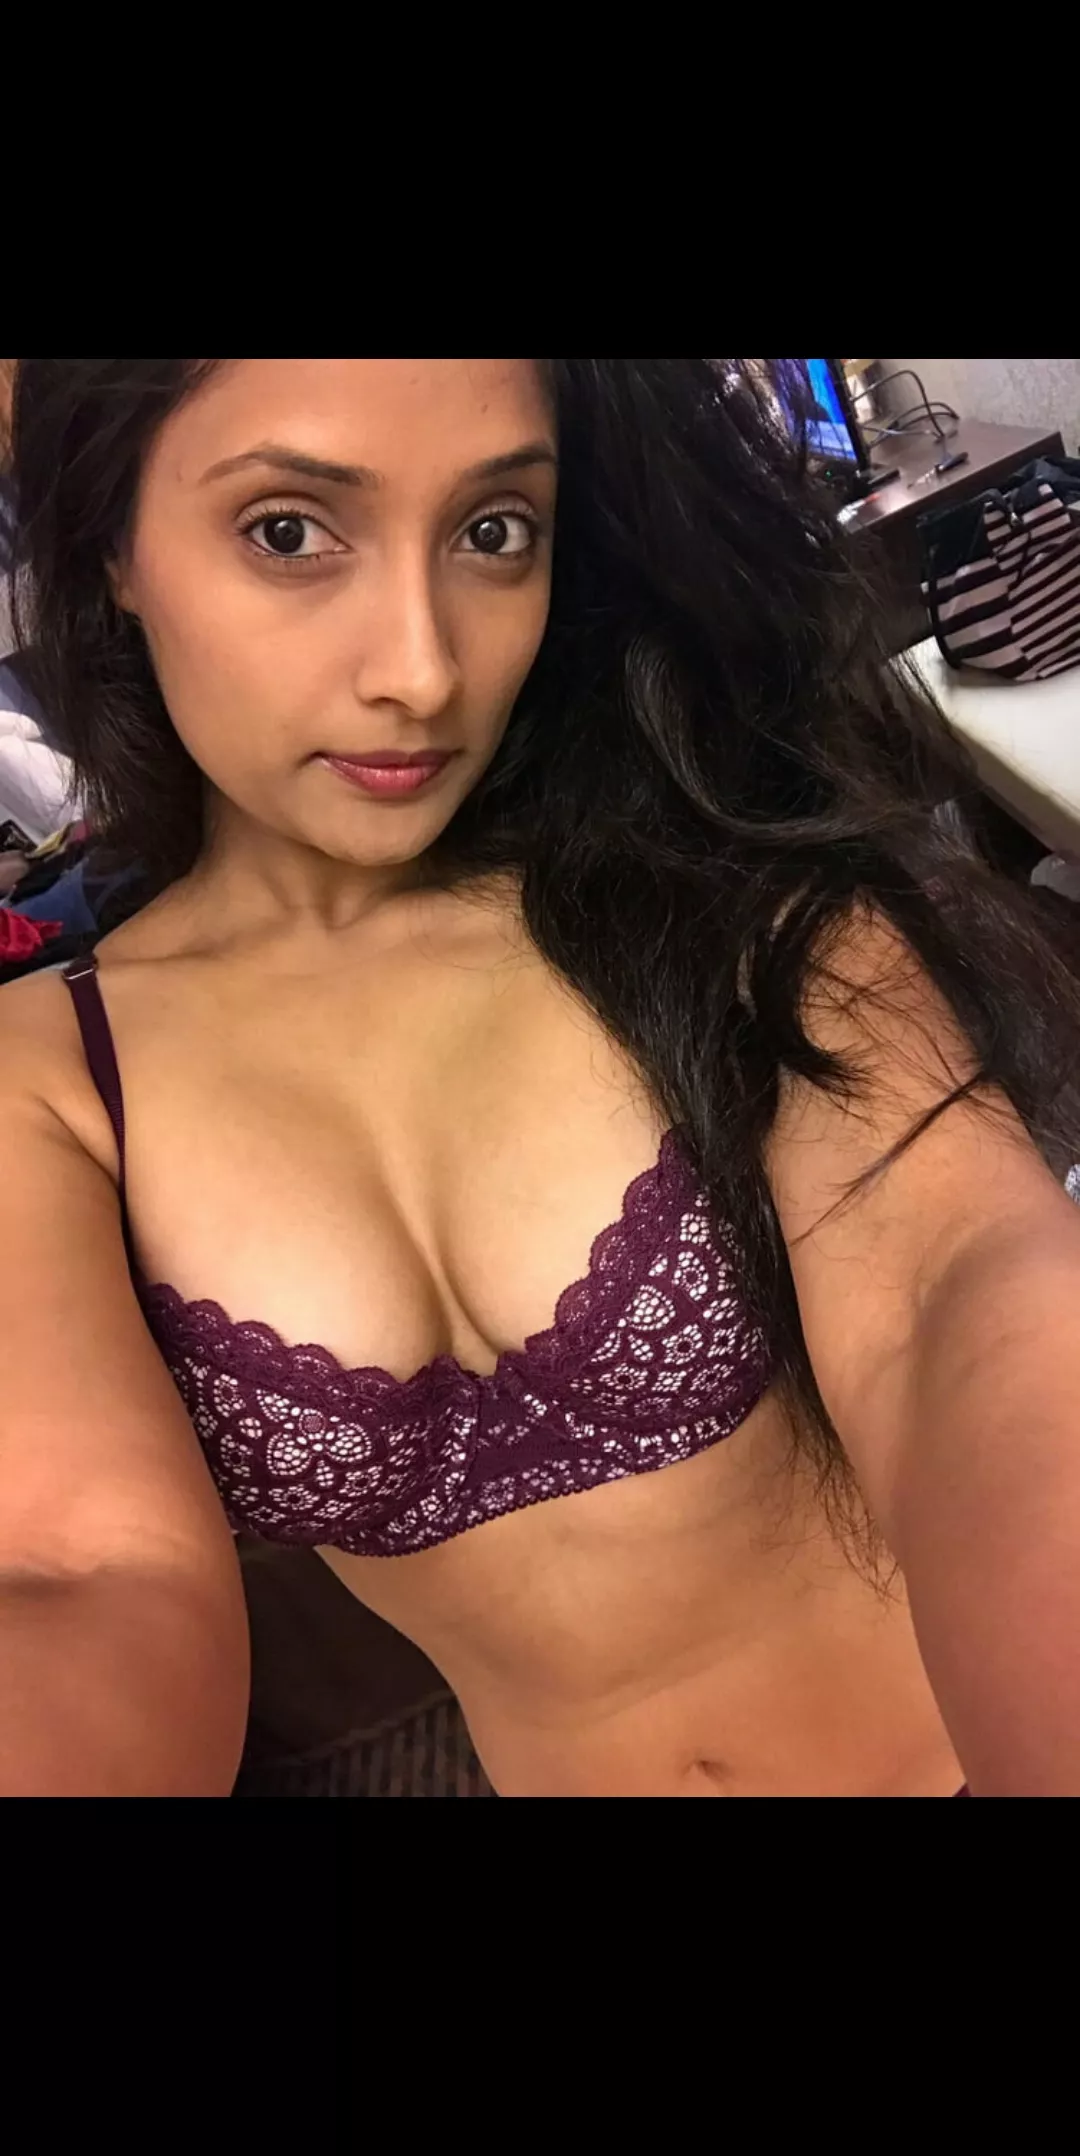 Sexy beautiful girl full nude album showing everything 😍🤤🥵 link in comment ⬇️ nudes IndianHot NUDE-PICS